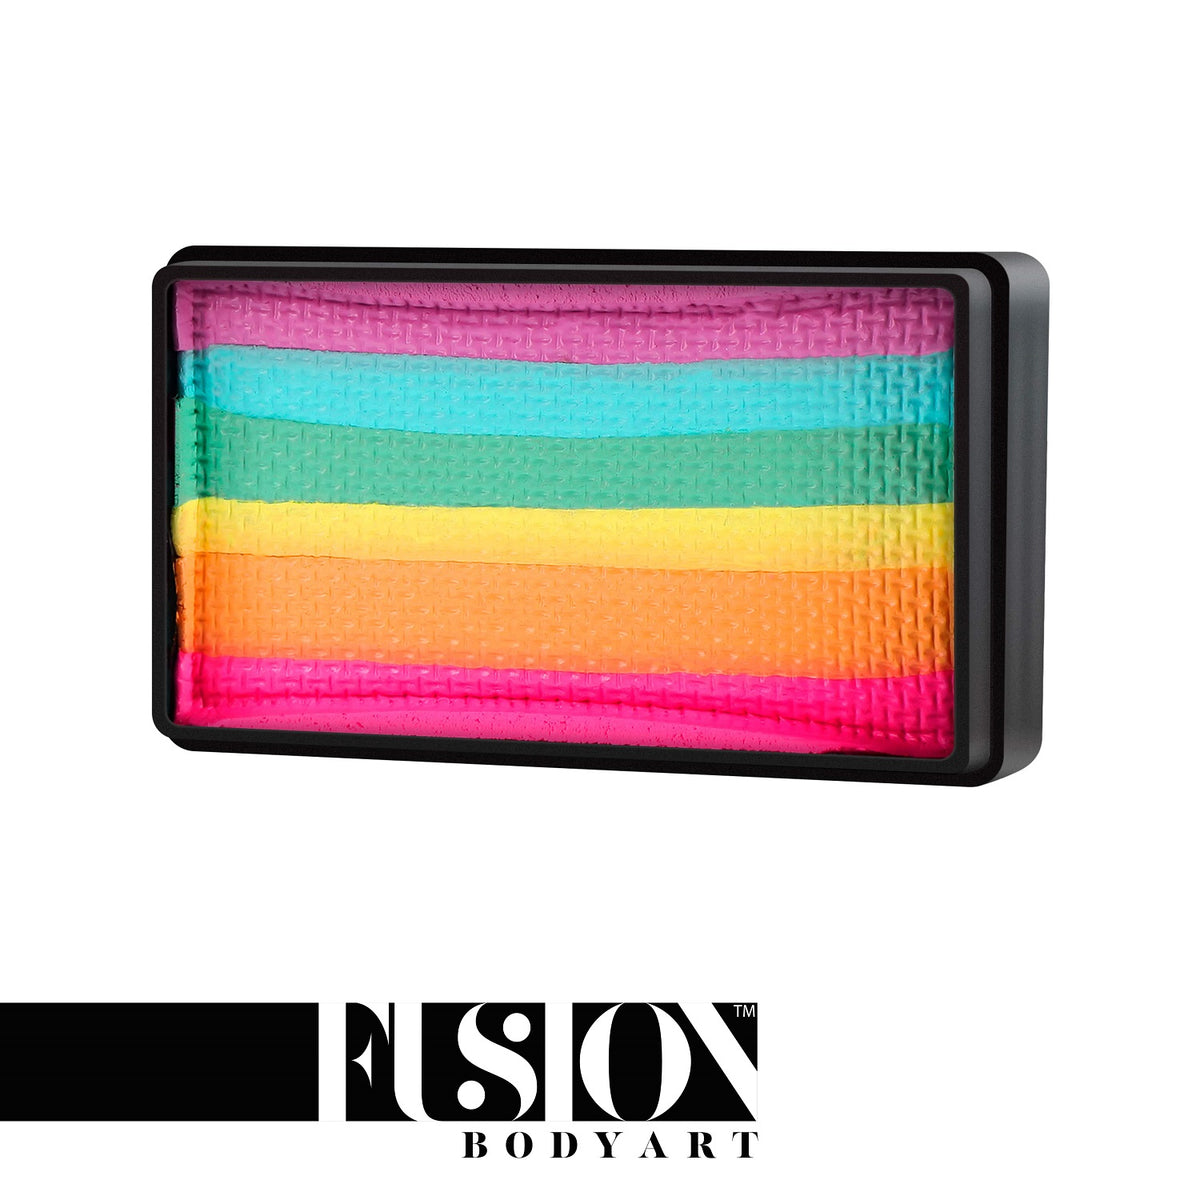 Fusion Body Art FX 1 Stroke Cake - Pastel Rainbow by Lodie Up (30 gm)